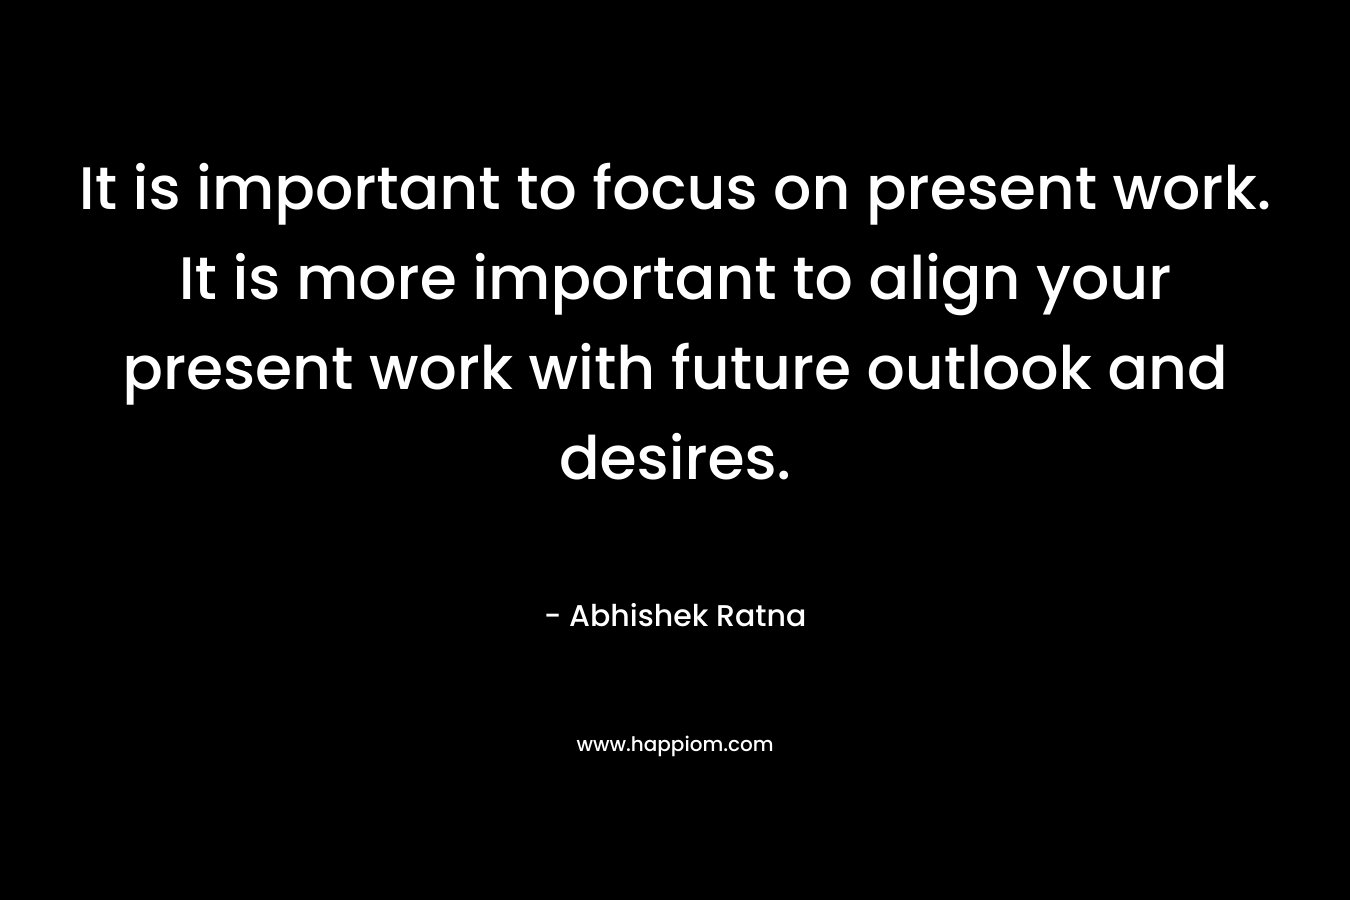 It is important to focus on present work. It is more important to align your present work with future outlook and desires. – Abhishek Ratna